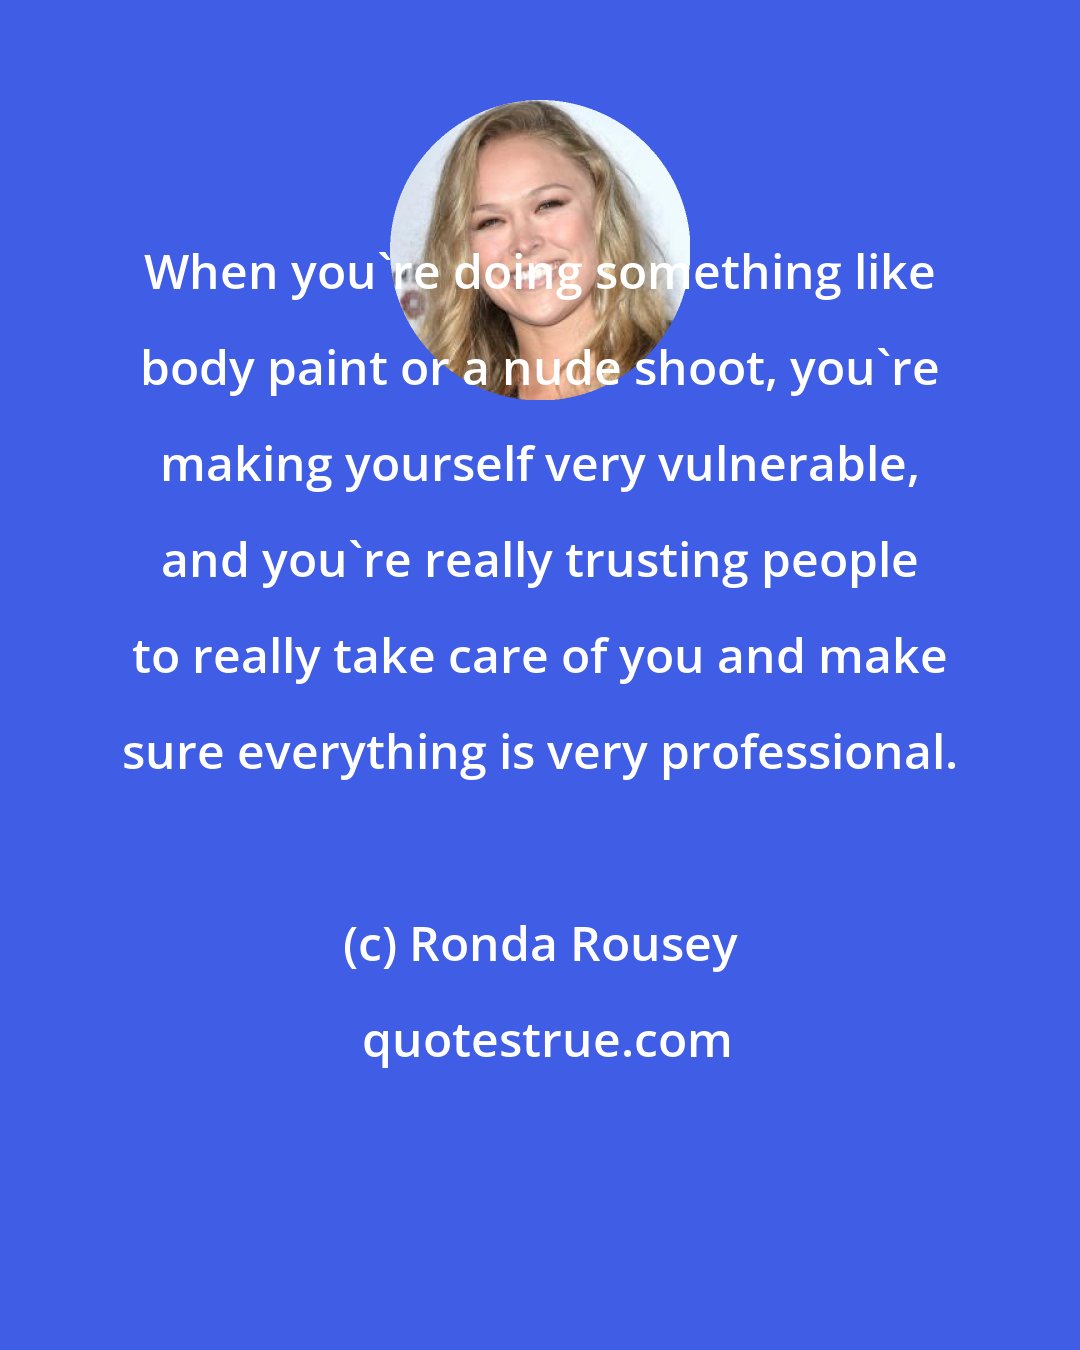 Ronda Rousey: When you're doing something like body paint or a nude shoot, you're making yourself very vulnerable, and you're really trusting people to really take care of you and make sure everything is very professional.